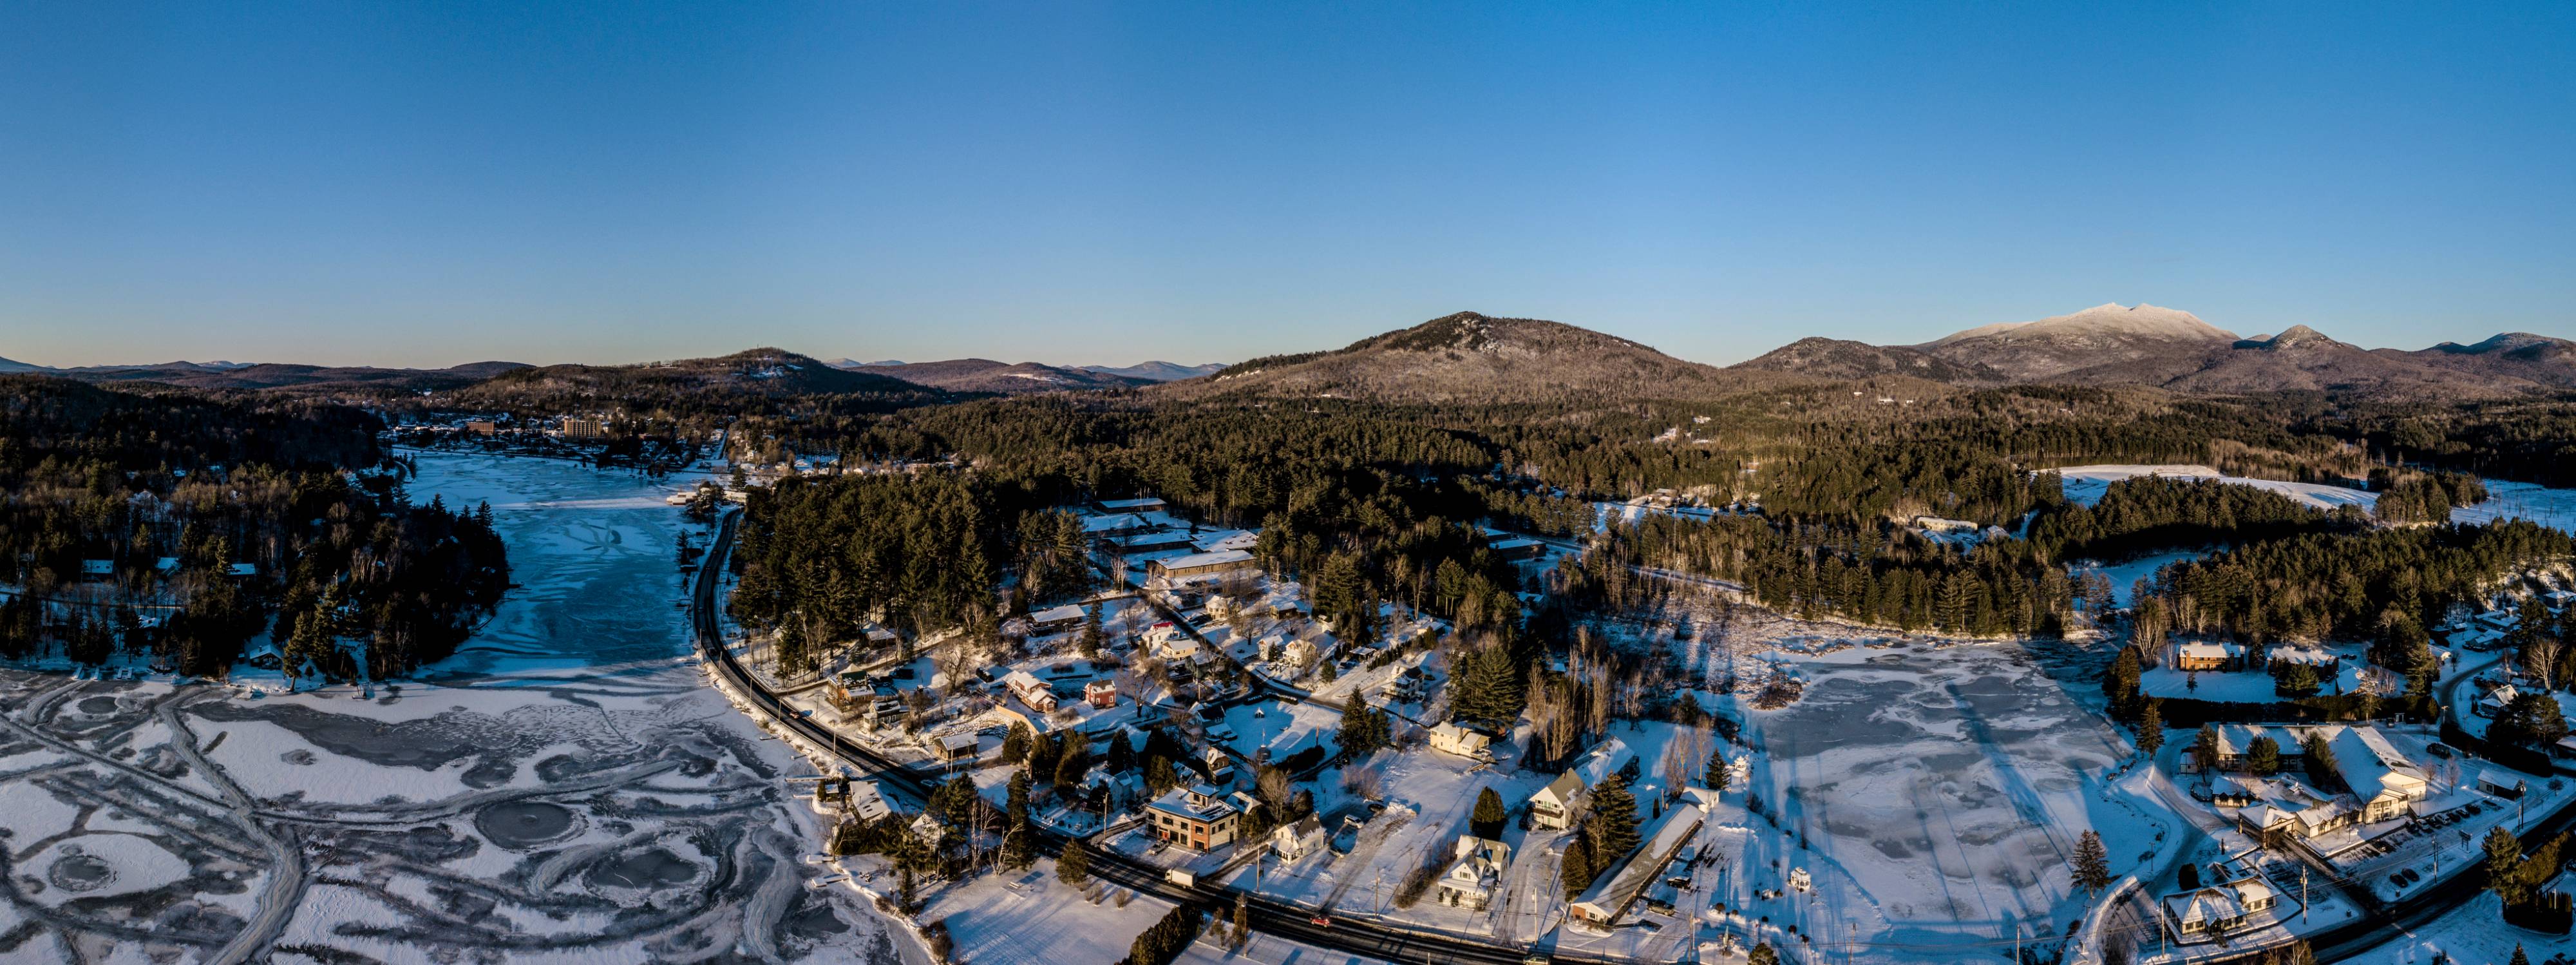 Lake Flower and the Village of Saranac Lake in winter.